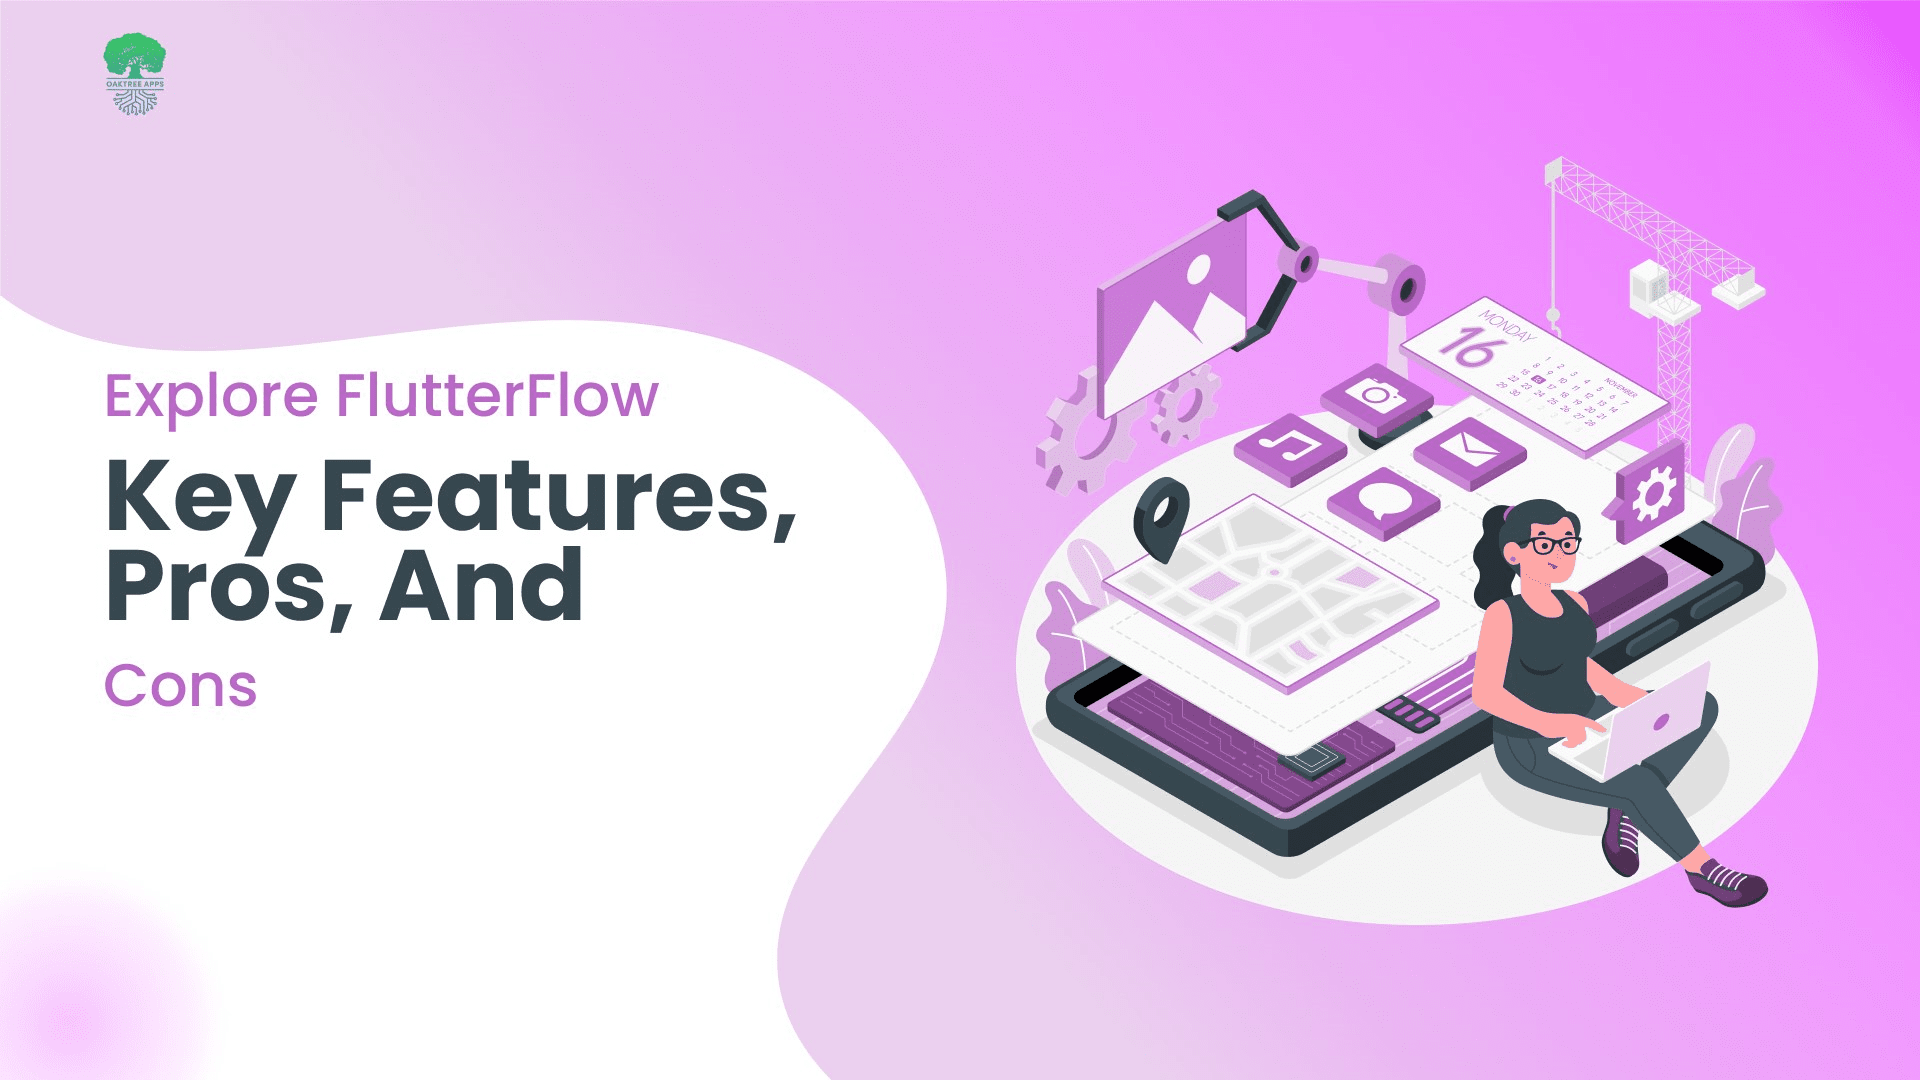 Explore_FlutterFlow_Key_Features_Pros_and_Cons.png